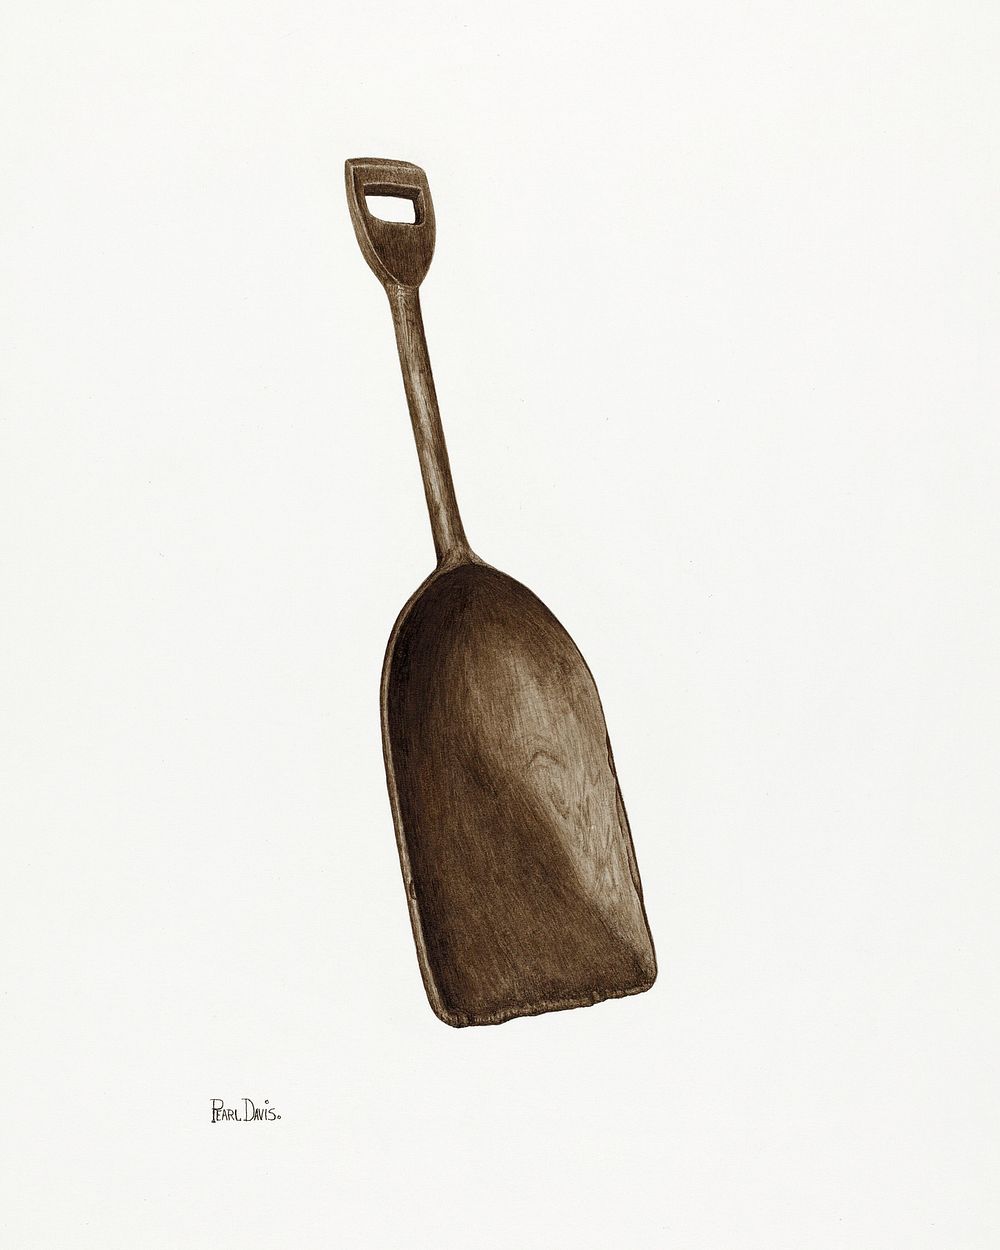 Wooden Grain Shovel (ca.1941) by Pearl Davis. Original from The National Gallery of Art. Digitally enhanced by rawpixel.